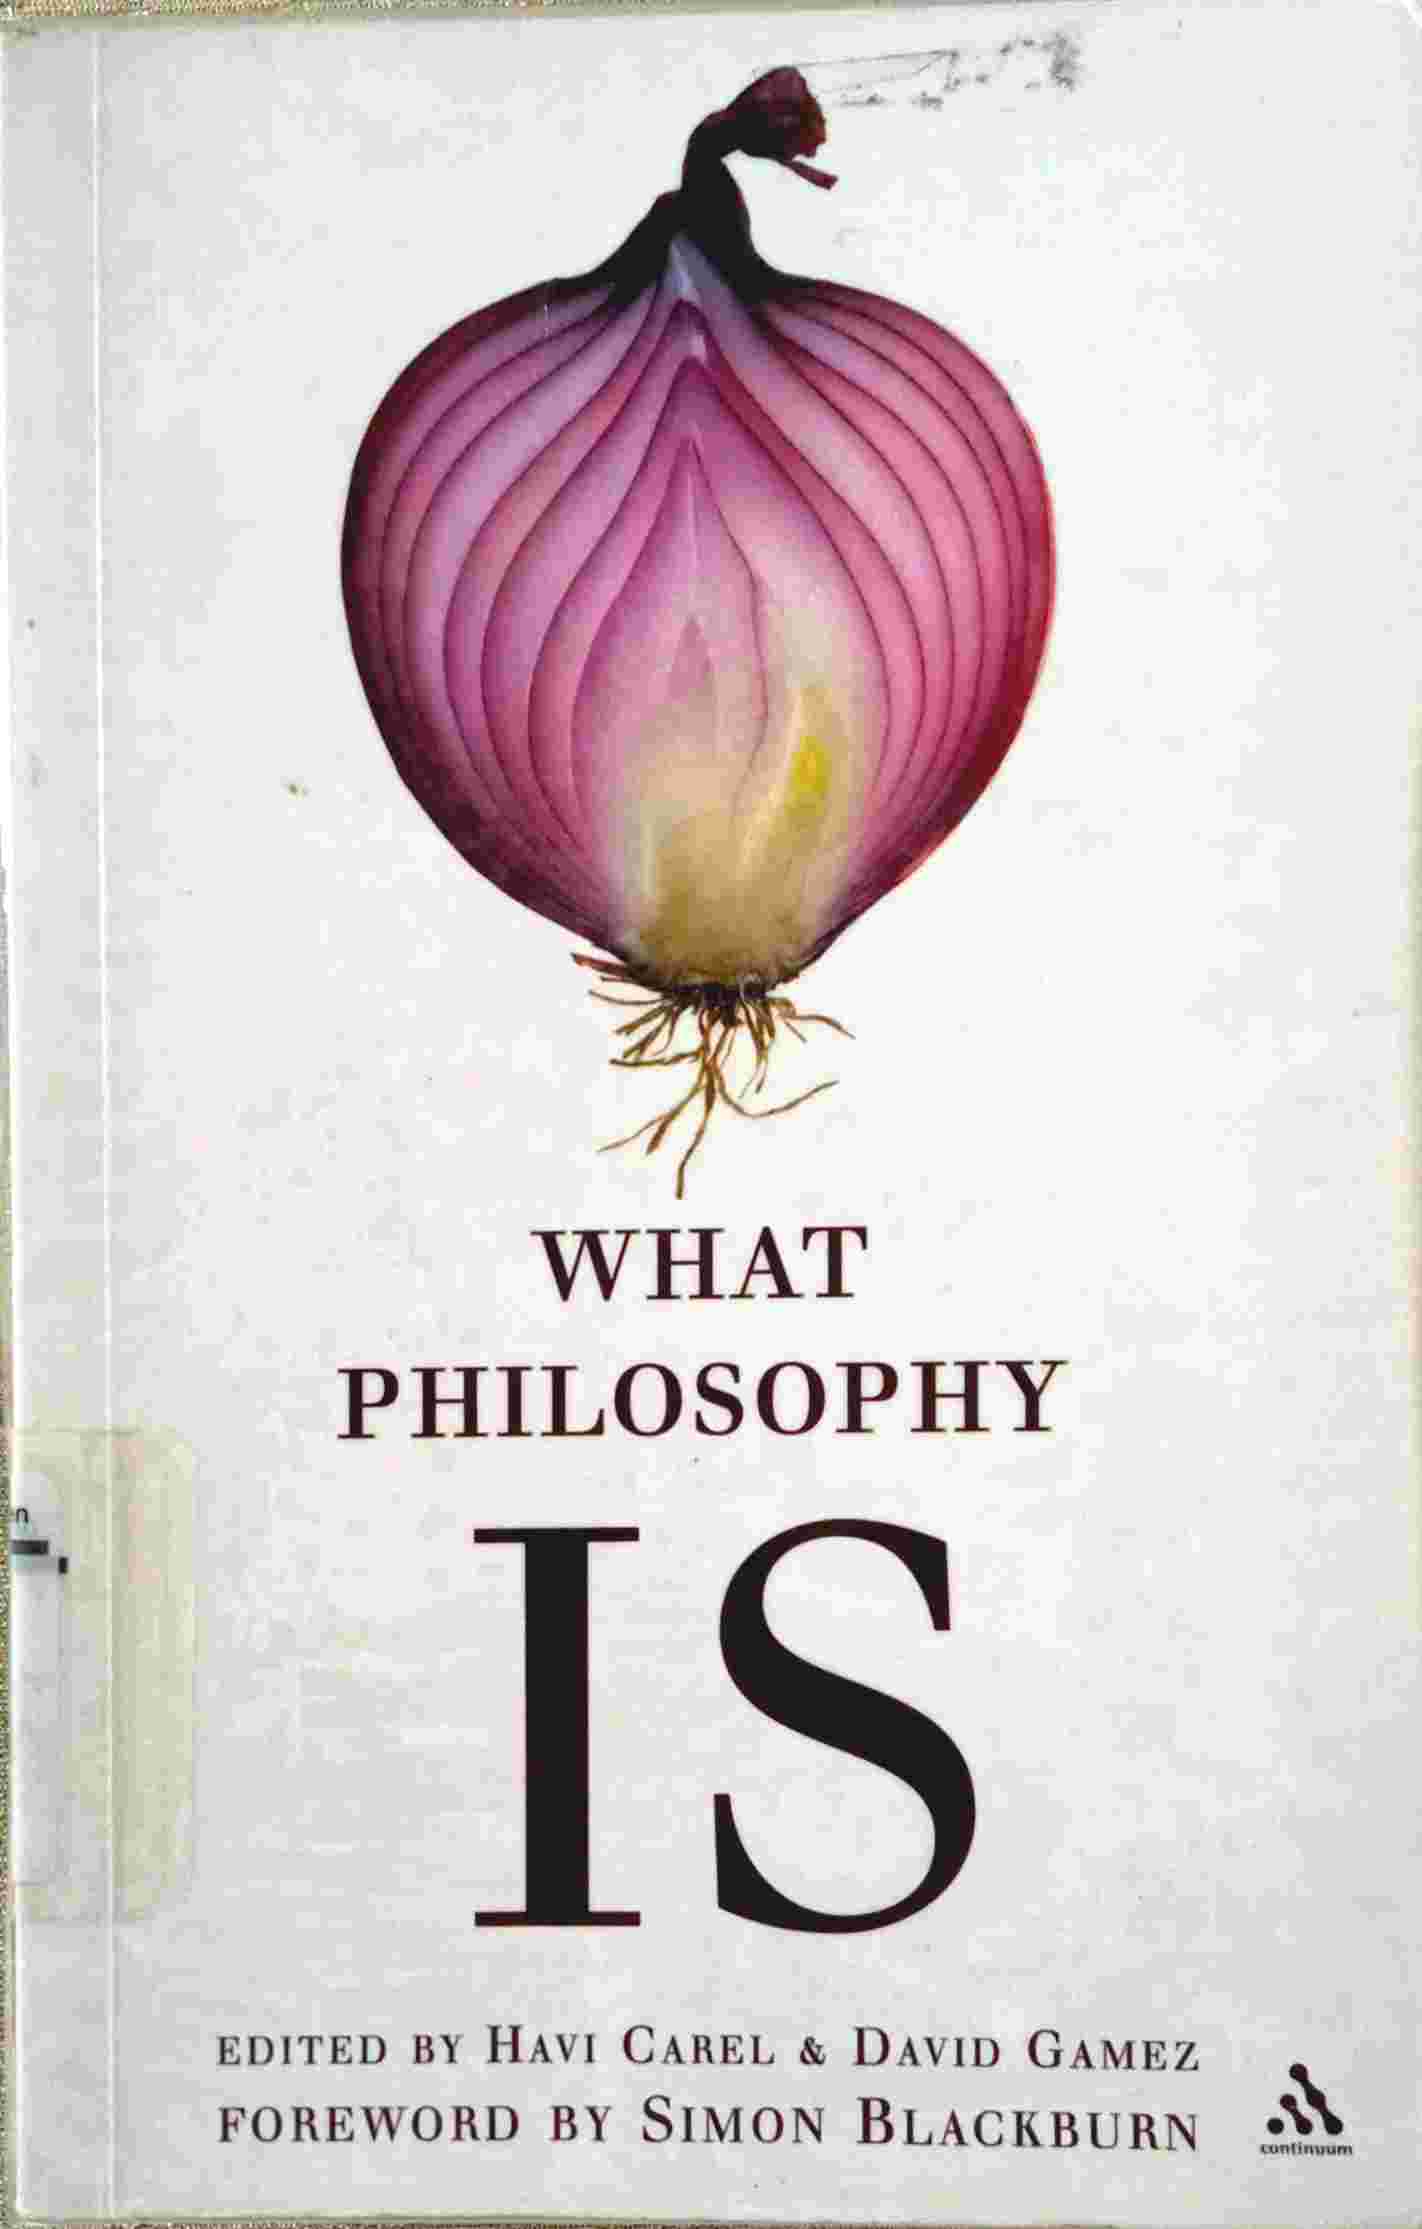 WHAT PHILOSOPHY IS